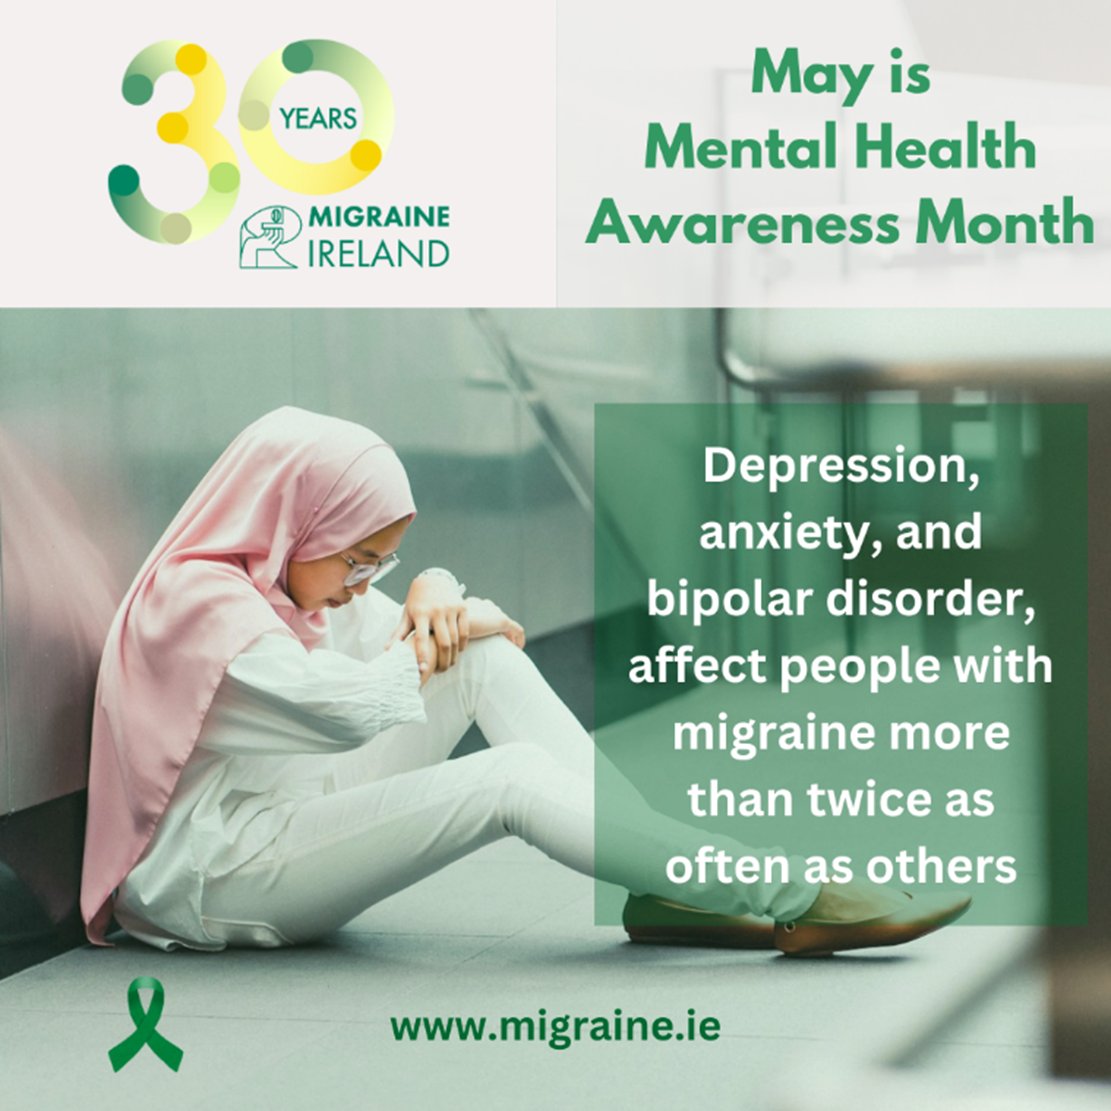 Did You Know? Migraine is the number 1 cause of disability in the WORLD for women under 50 years of age and that it can cause extremely disabling symptoms. #notjustacheadache #mentalhealthweek #migraine #mentalhealth #pain #disability #endthestigma